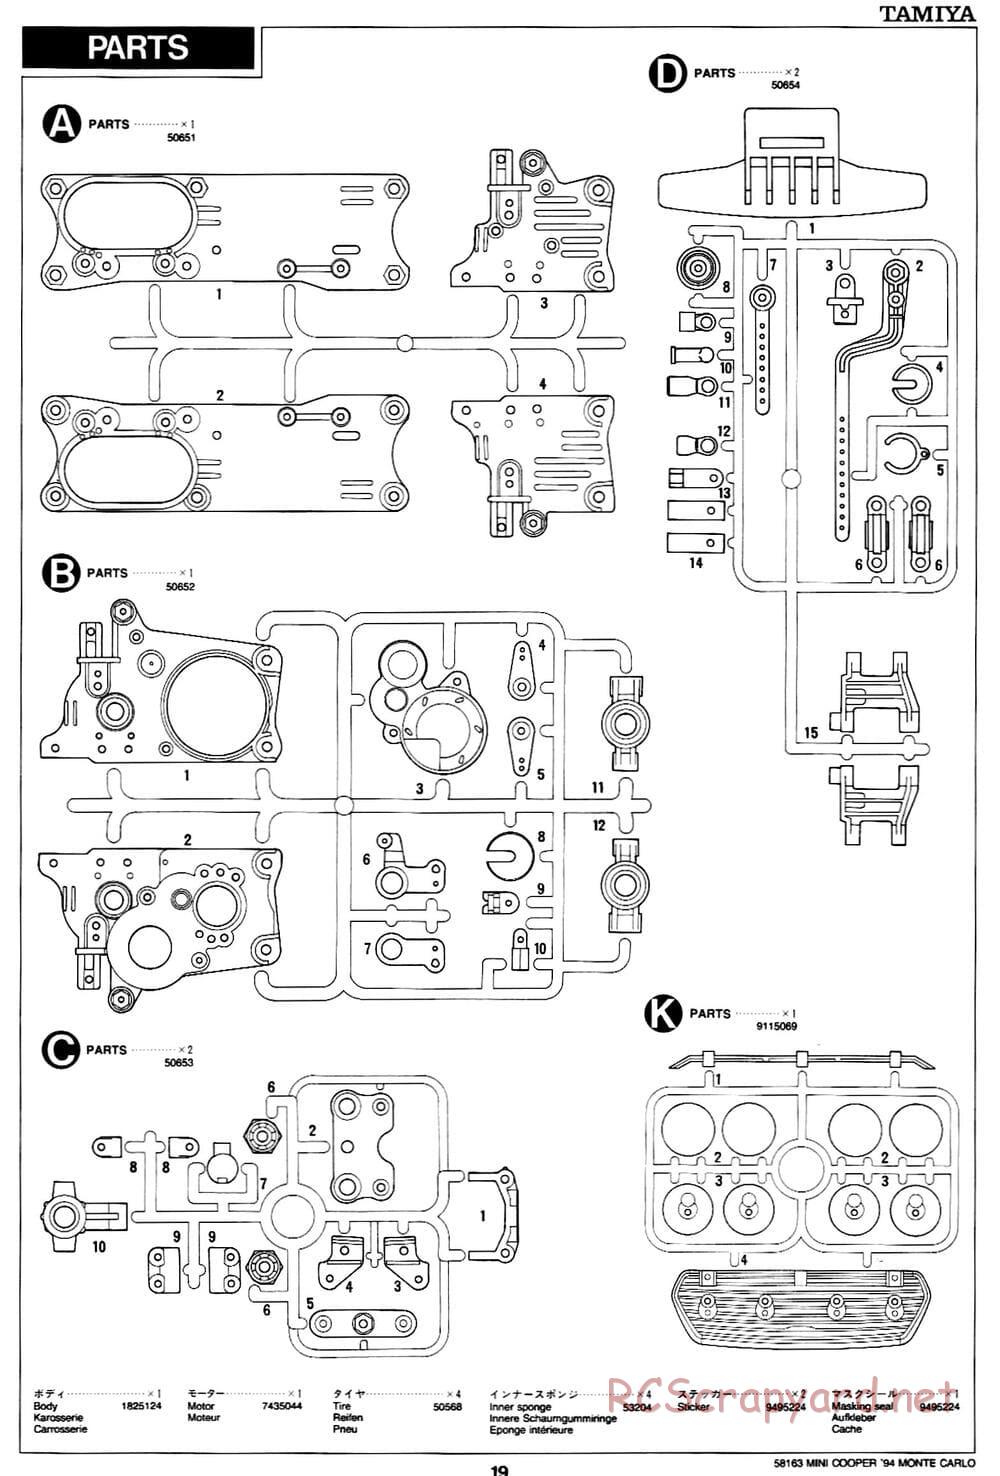 Tamiya - Rover Mini Cooper 94 Monte-Carlo - M01 Chassis - Manual - Page 19